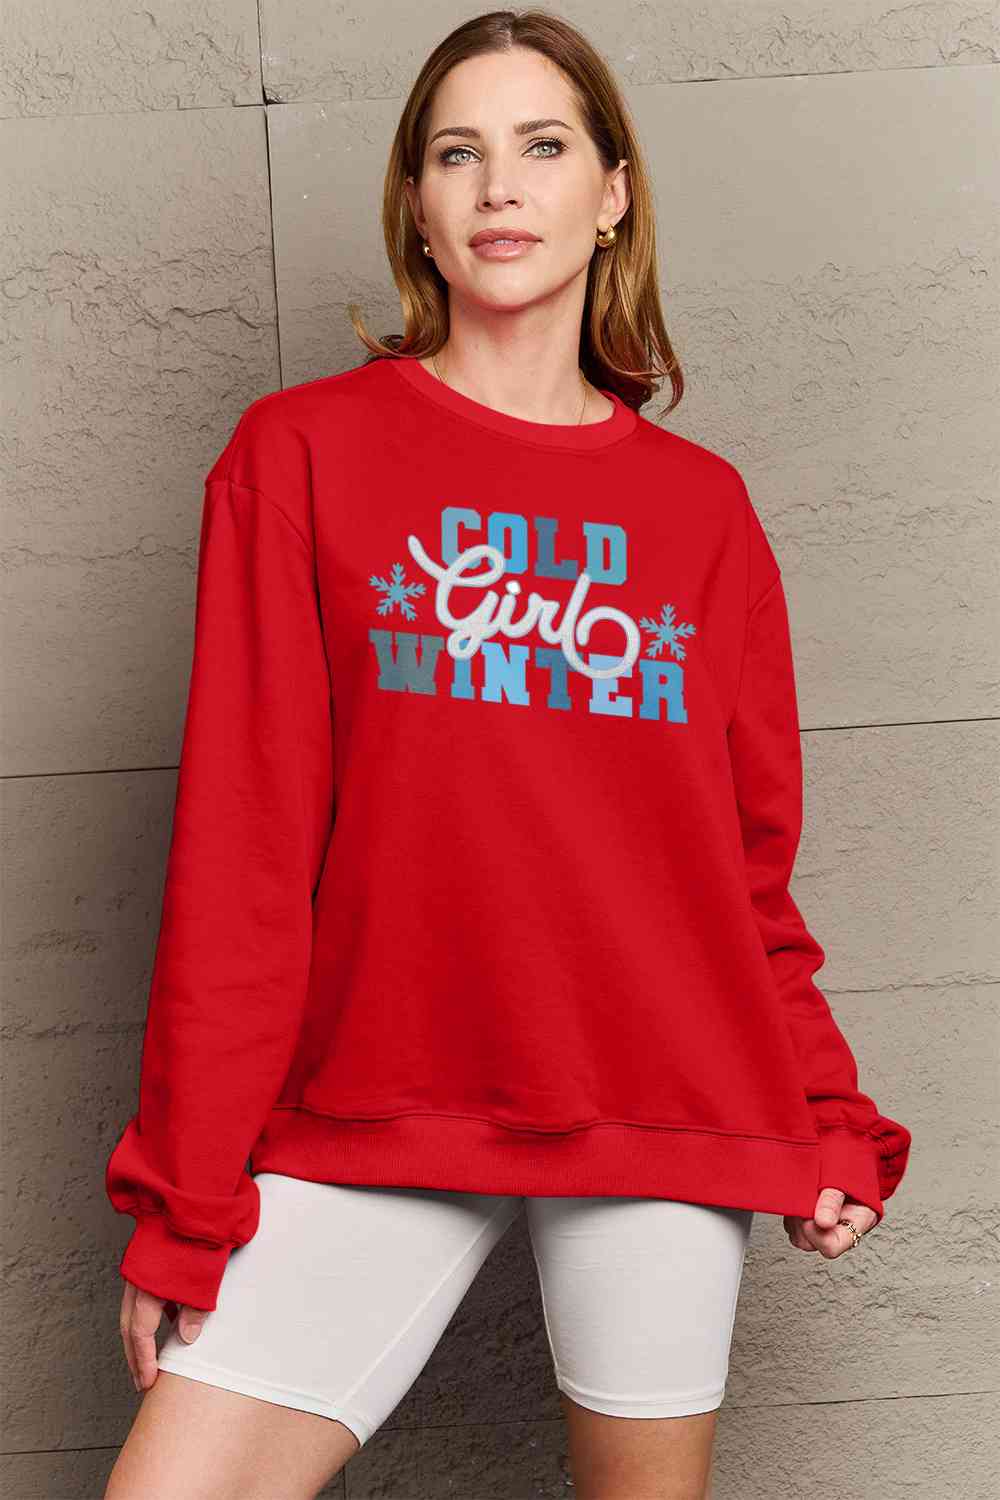 Simply Love Full Size COLD WINTER Graphic Long Sleeve Sweatshirt BLUE ZONE PLANET